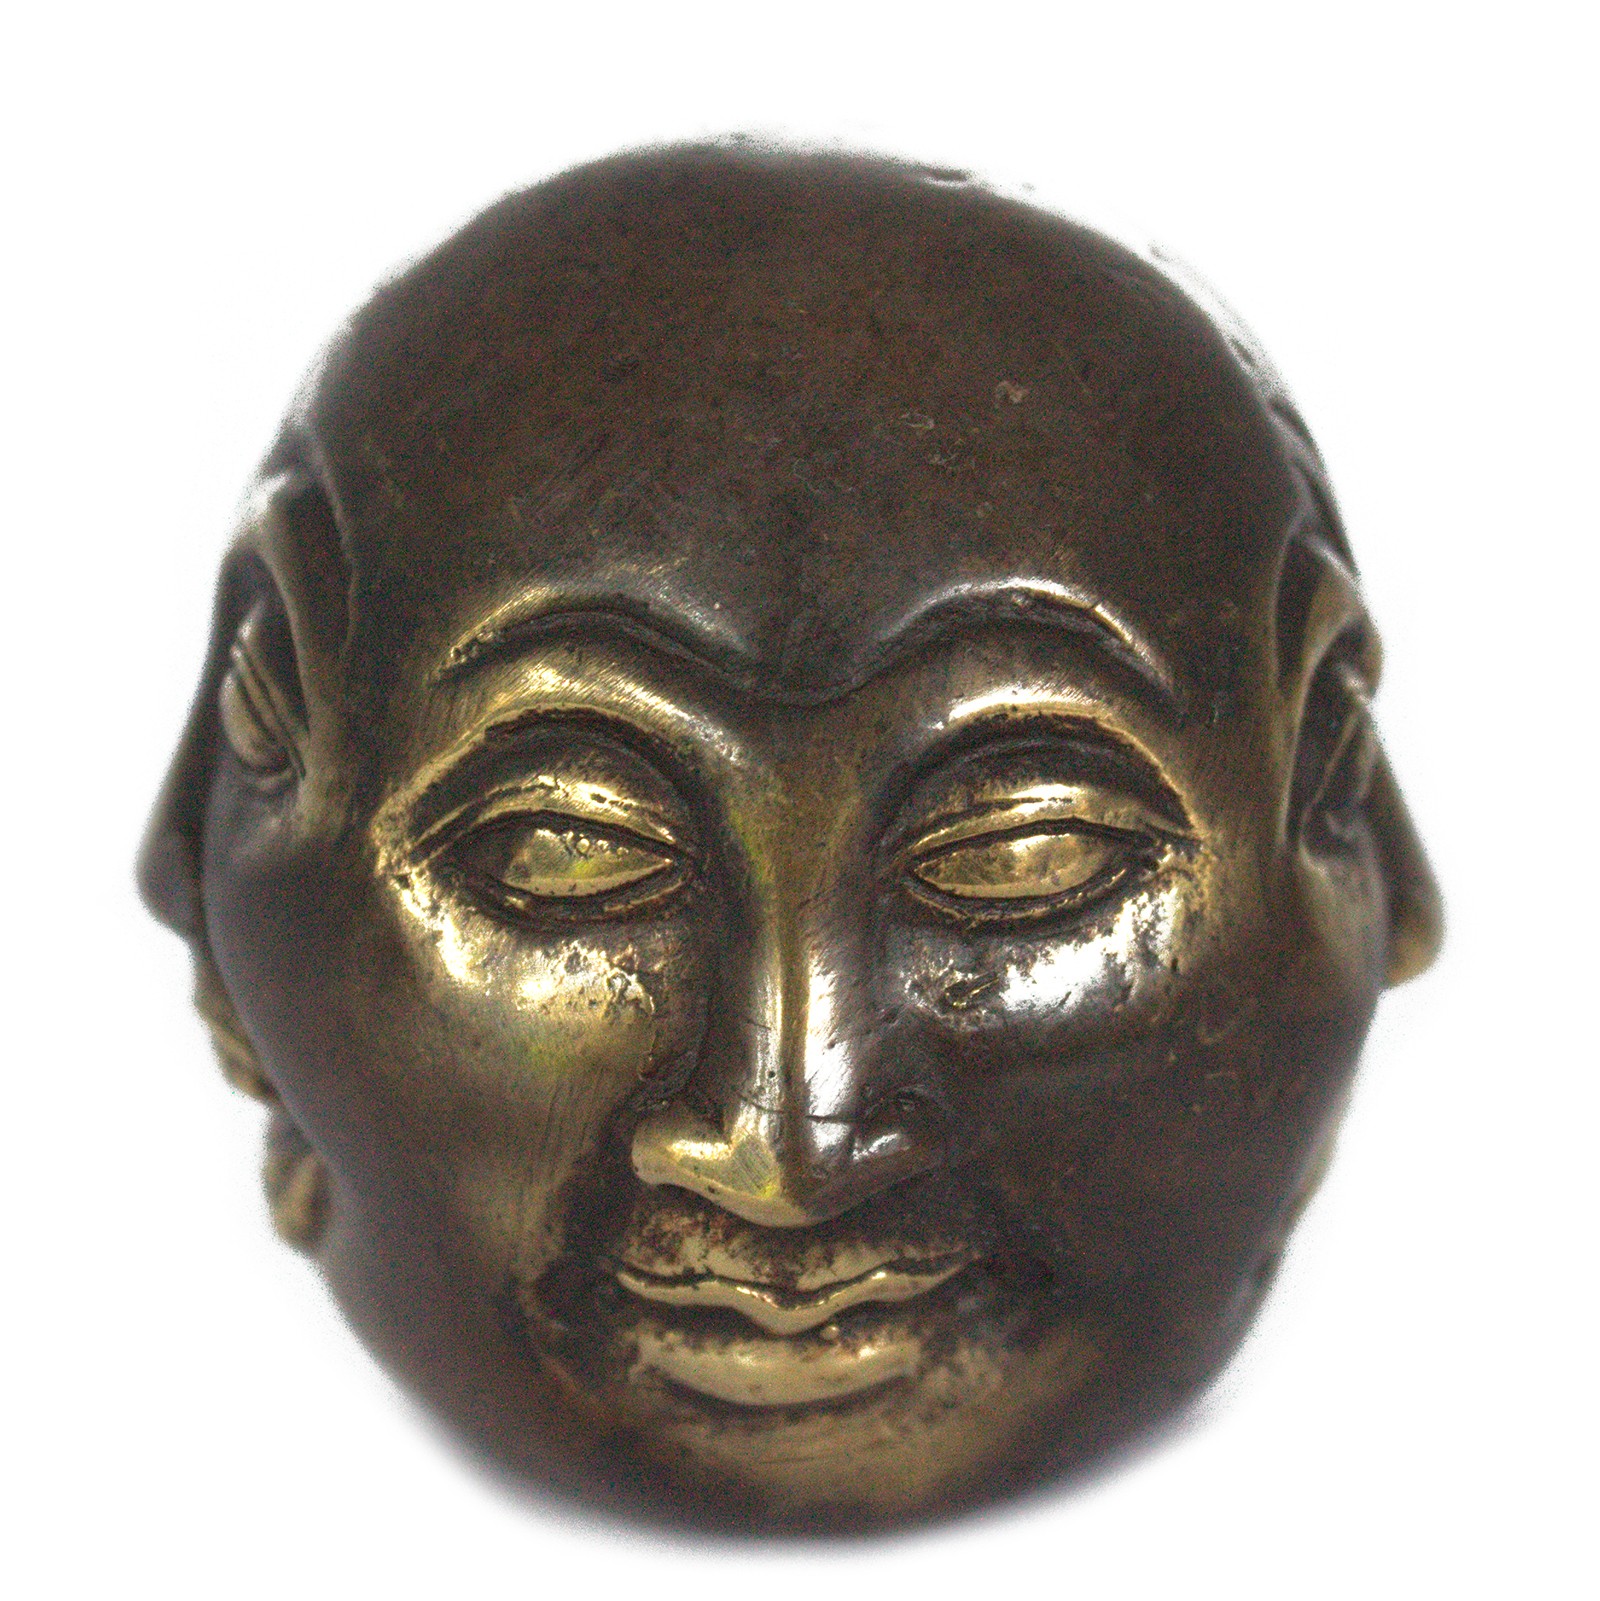 Fengshui - Four Face Buddha - 6cm - Ancient Wisdom - Wholesale Giftware